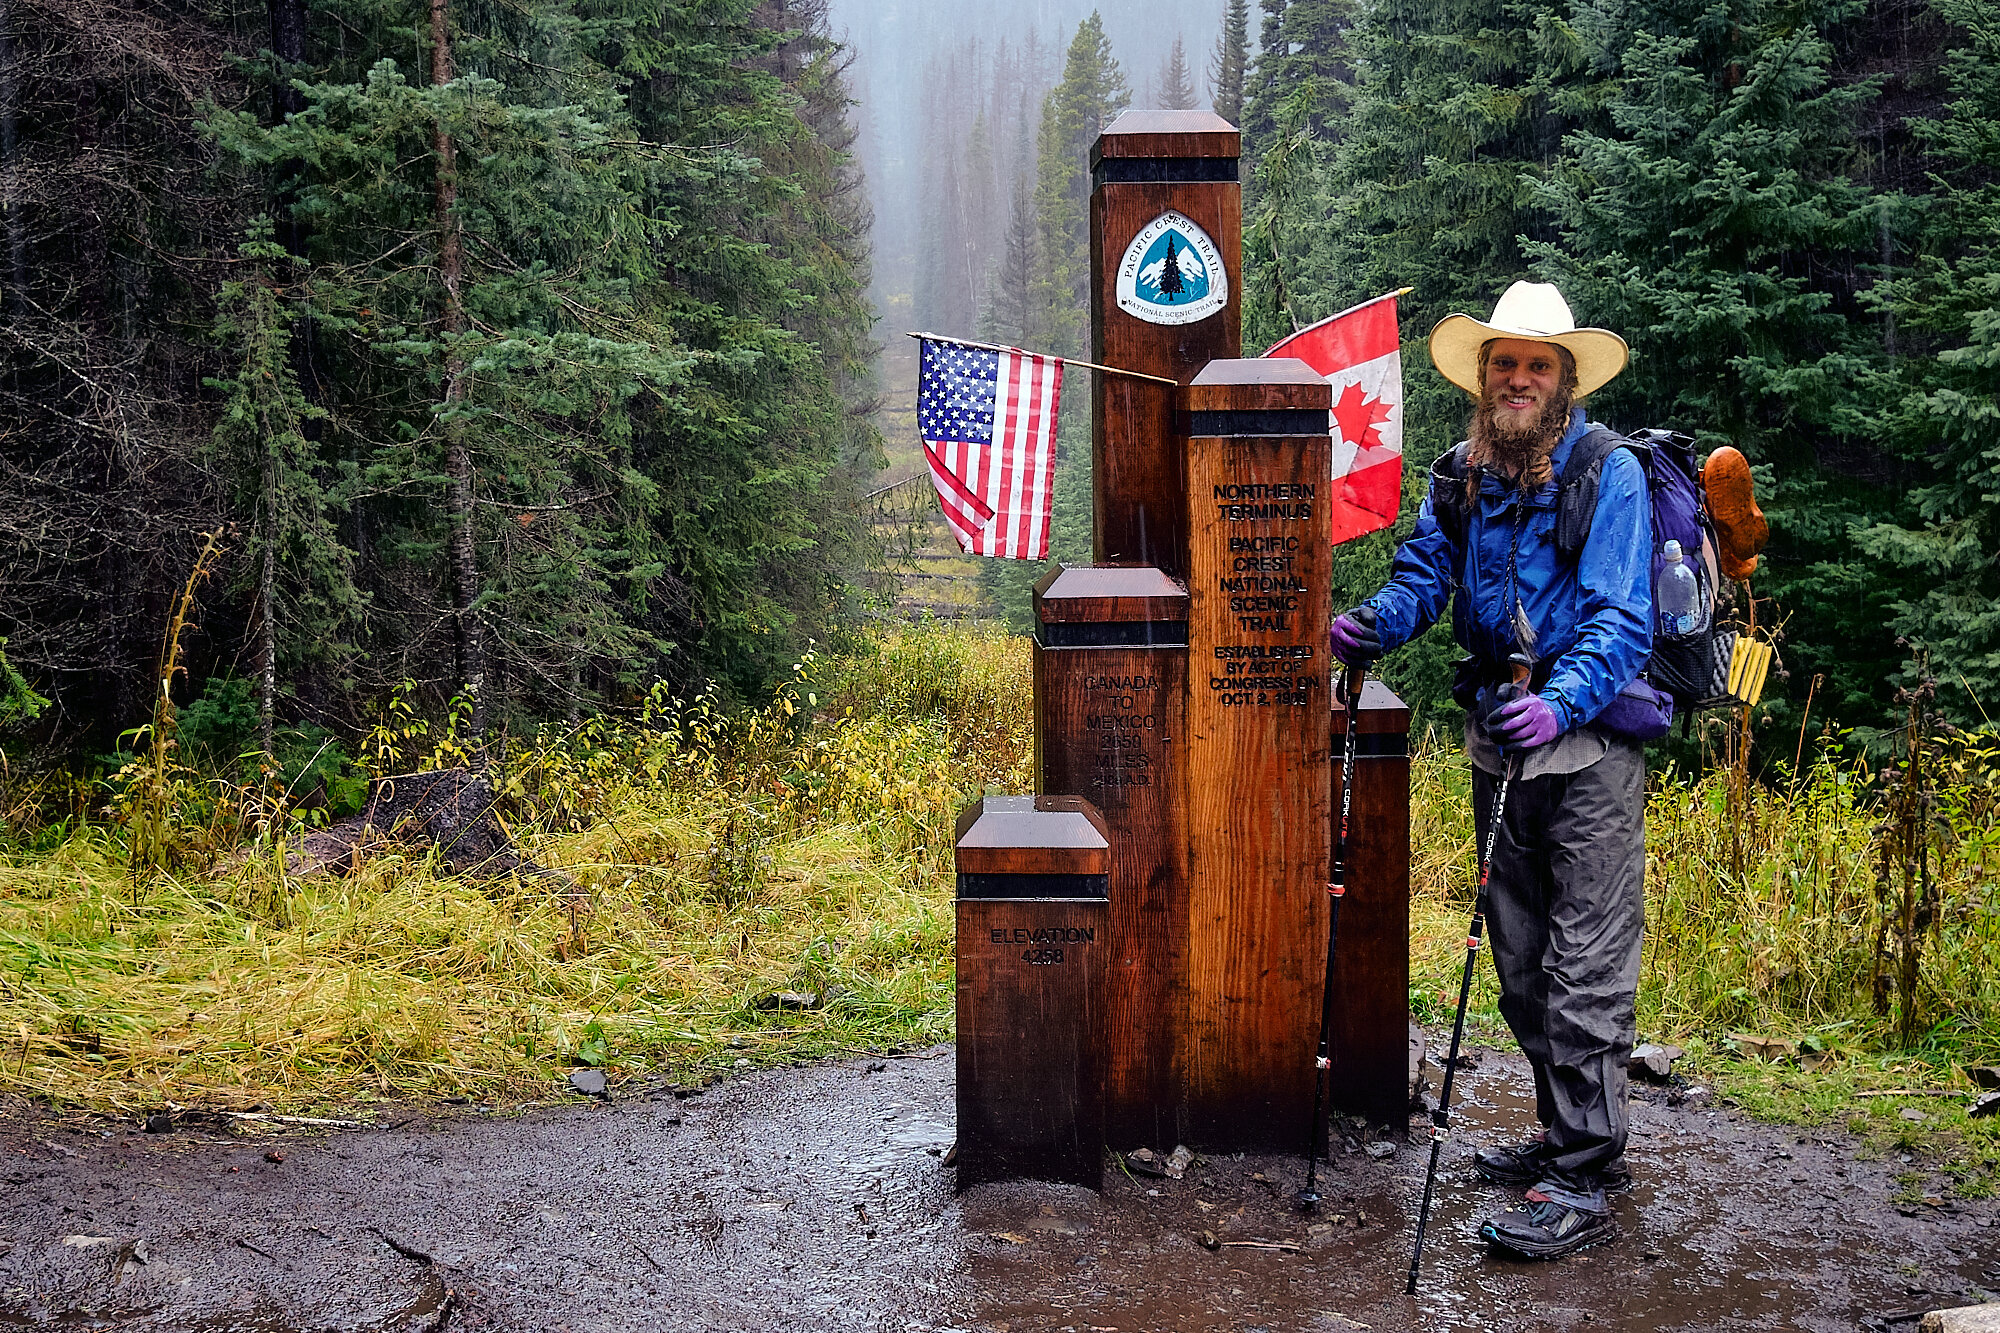  At long last, Canada! The line cut through the trees behind the monument is the border. Celebrations didn't last long as the temperature dropped and the rain fell harder. | 10/7/19 Mile 2,652.6, 4,258' 